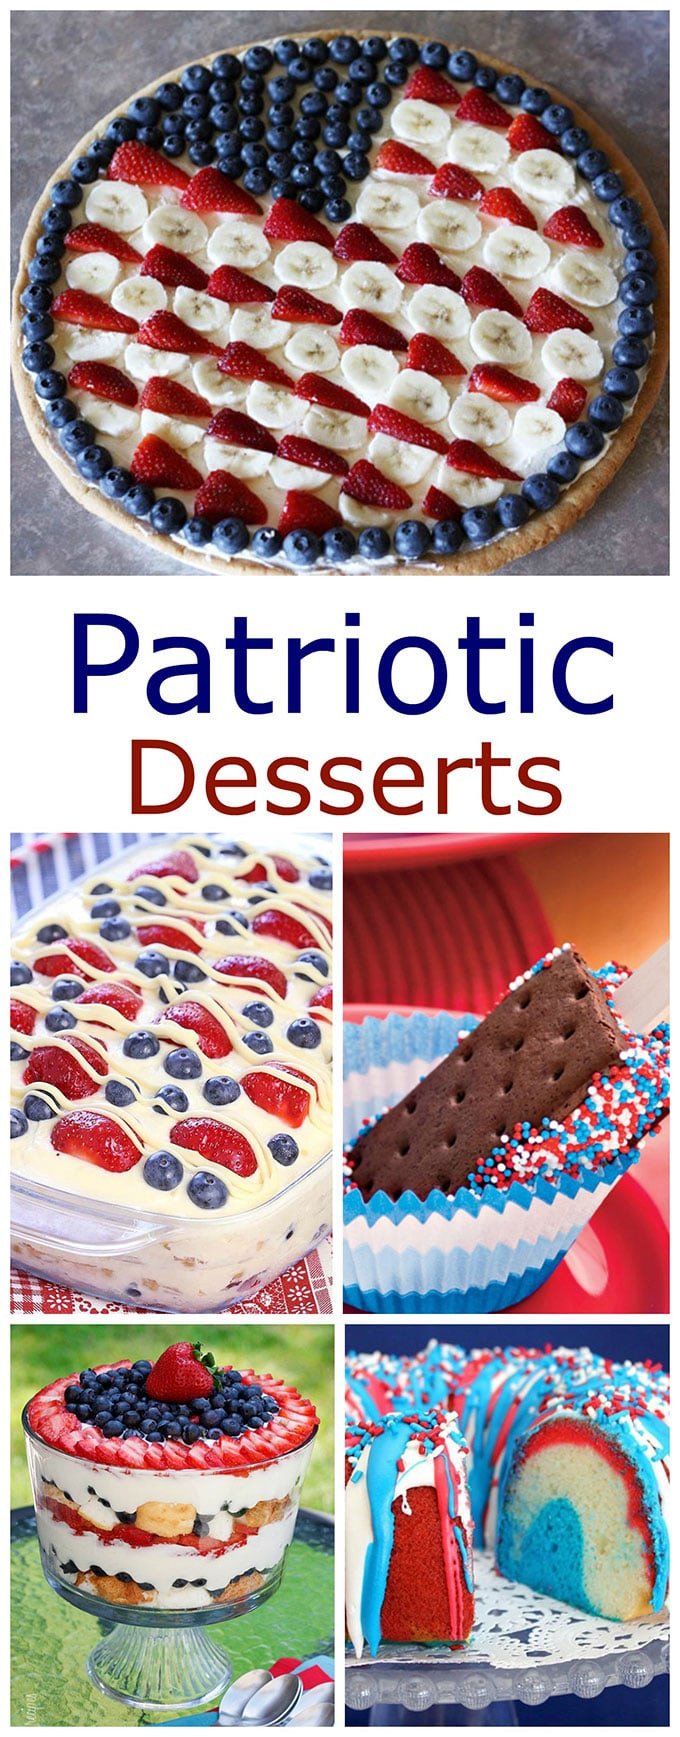 Fun Fourth Of July Desserts
 Last Minute 4th of July Dessert Ideas House of Hawthornes